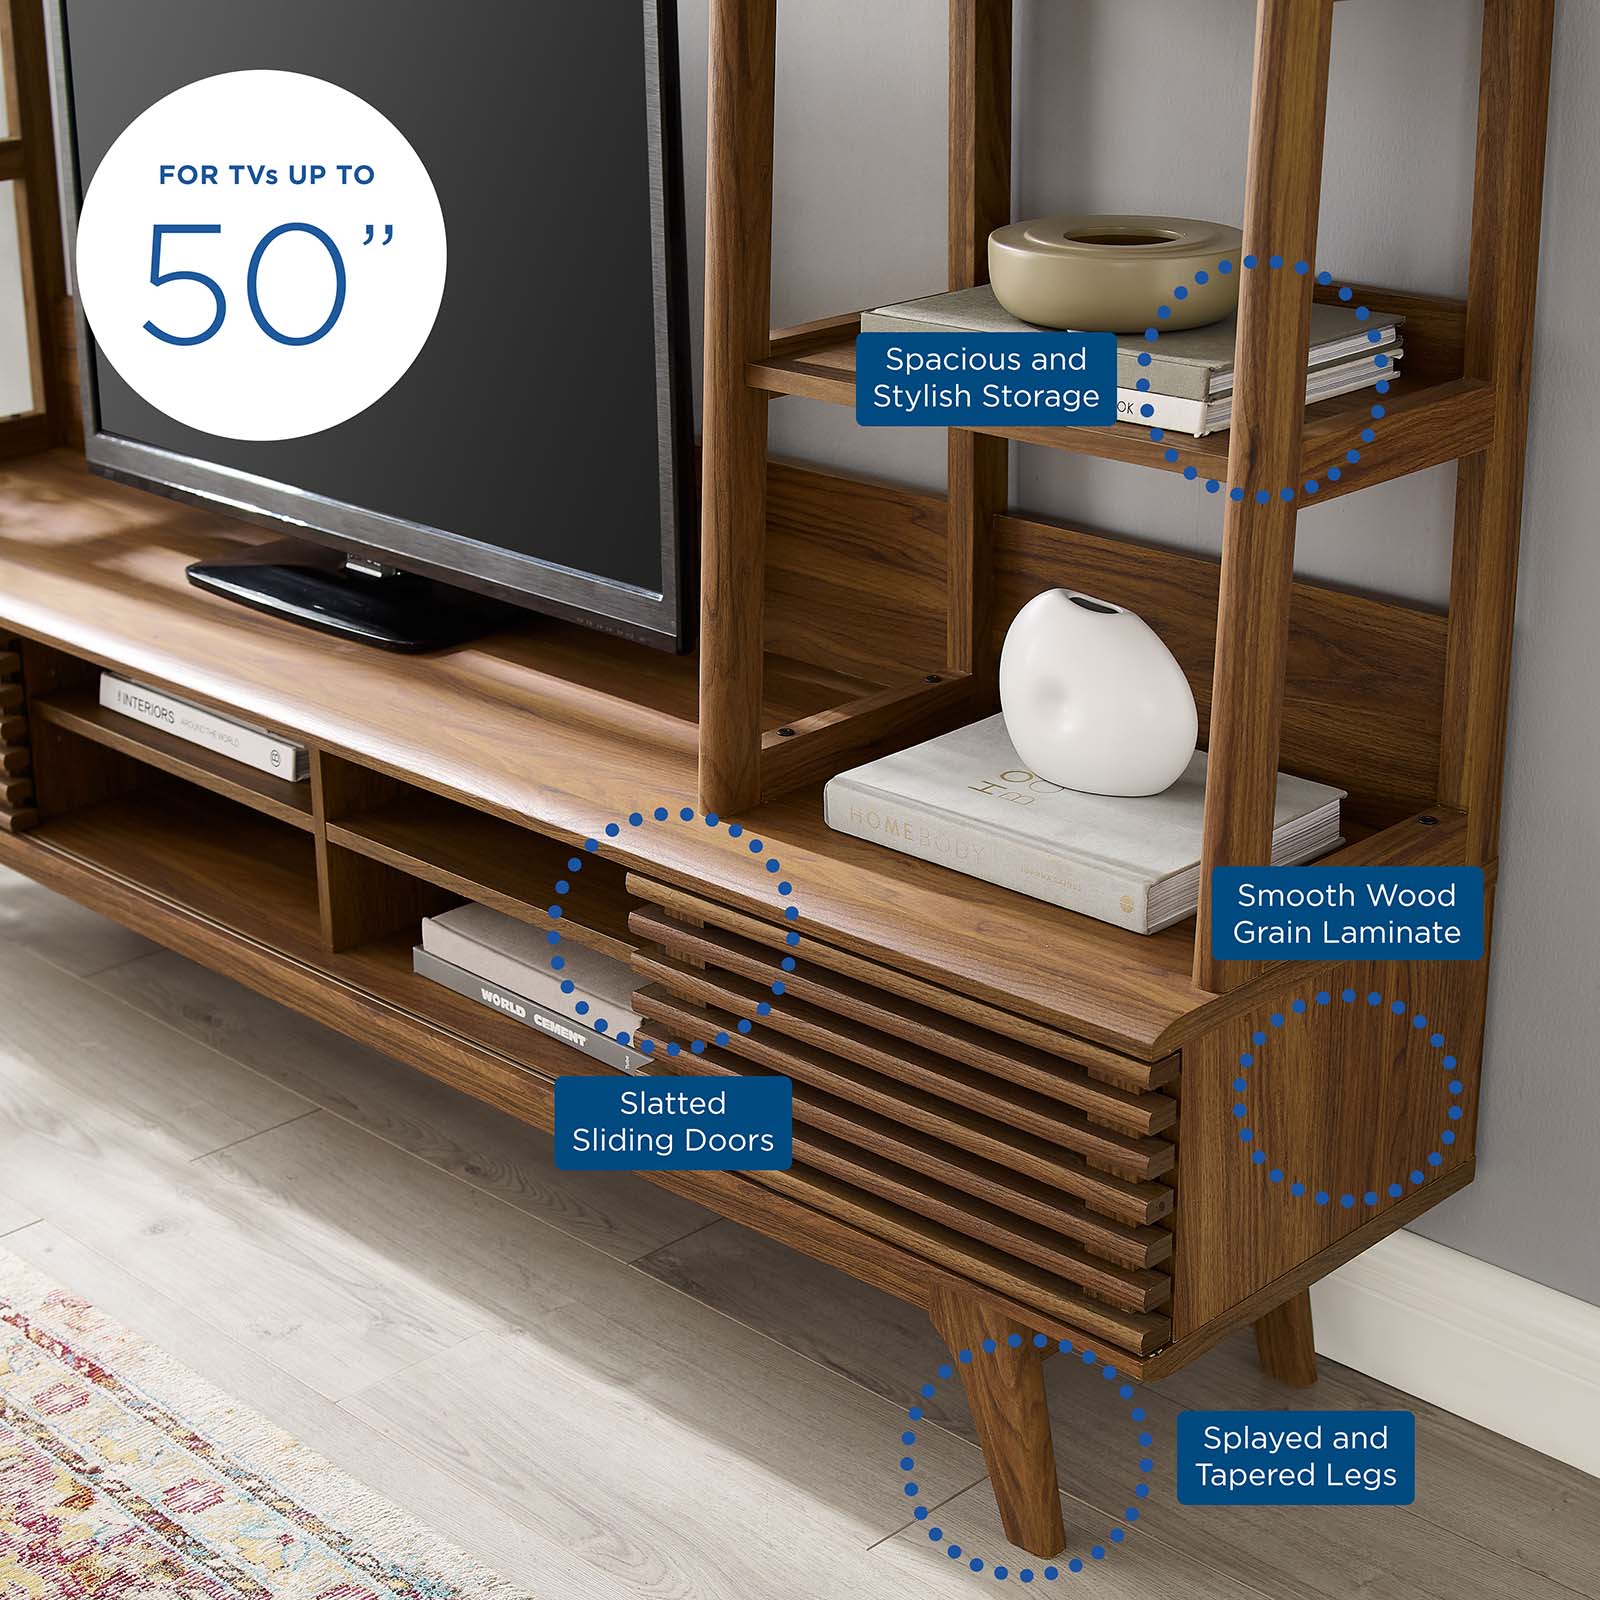 Render TV Stand Entertainment Center in Walnut - East Shore Modern Home Furnishings